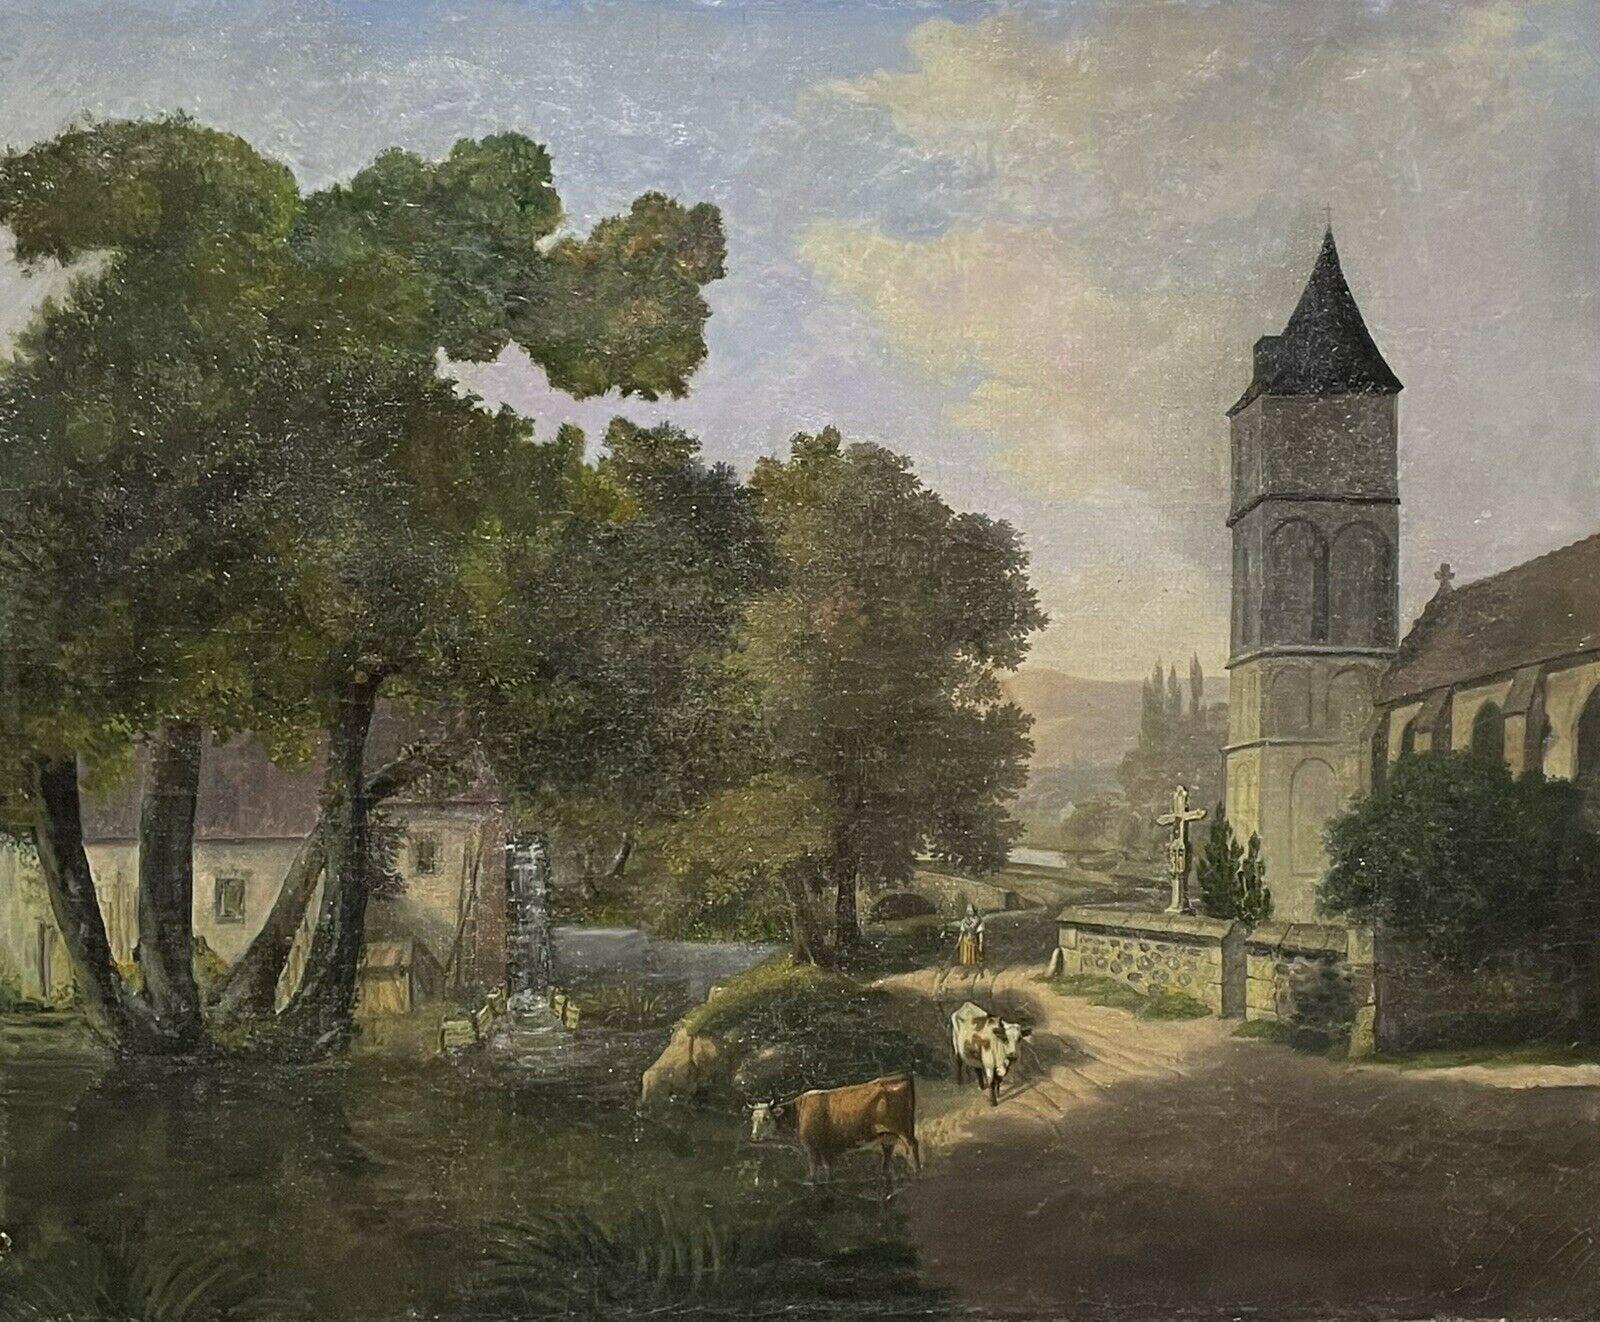 Unknown Landscape Painting - Early 19th Century French Oil Cattle being Driven through Old Village Street